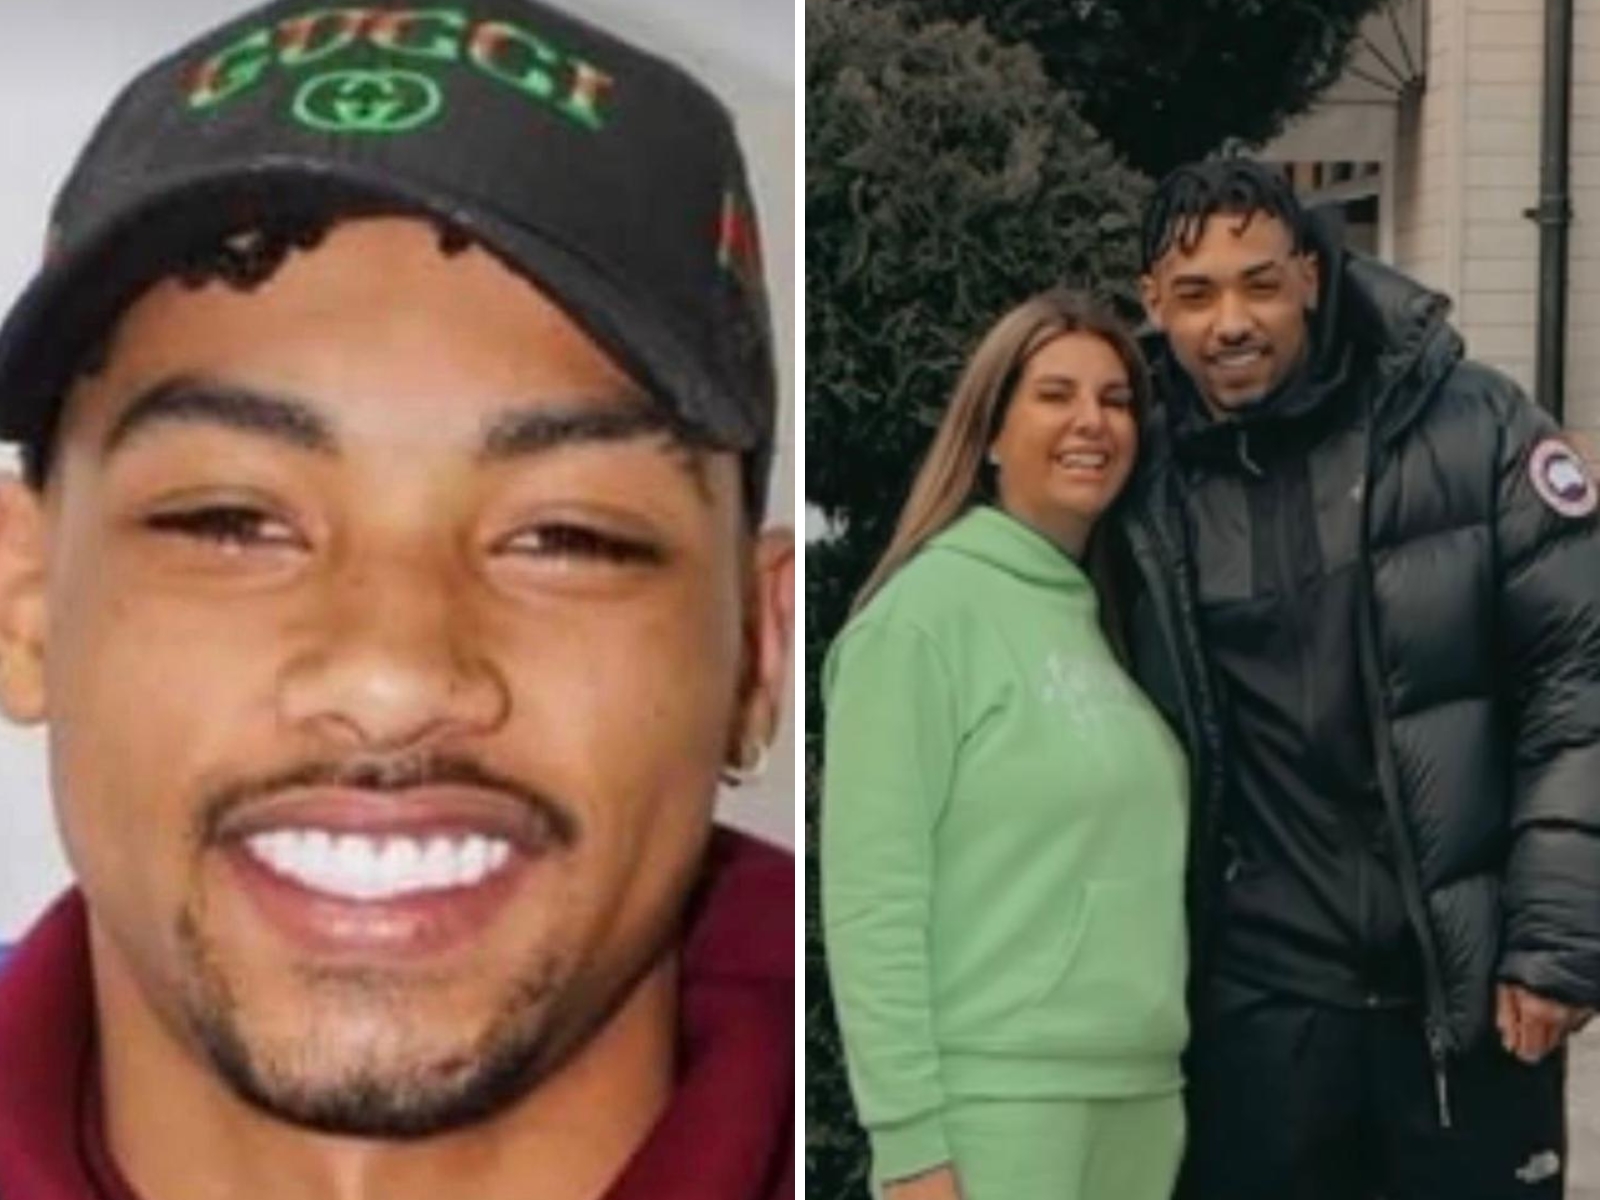 A split-screen showing Wassiou Leon Awaye and Wassiou with his foster mother Sandra Burns.